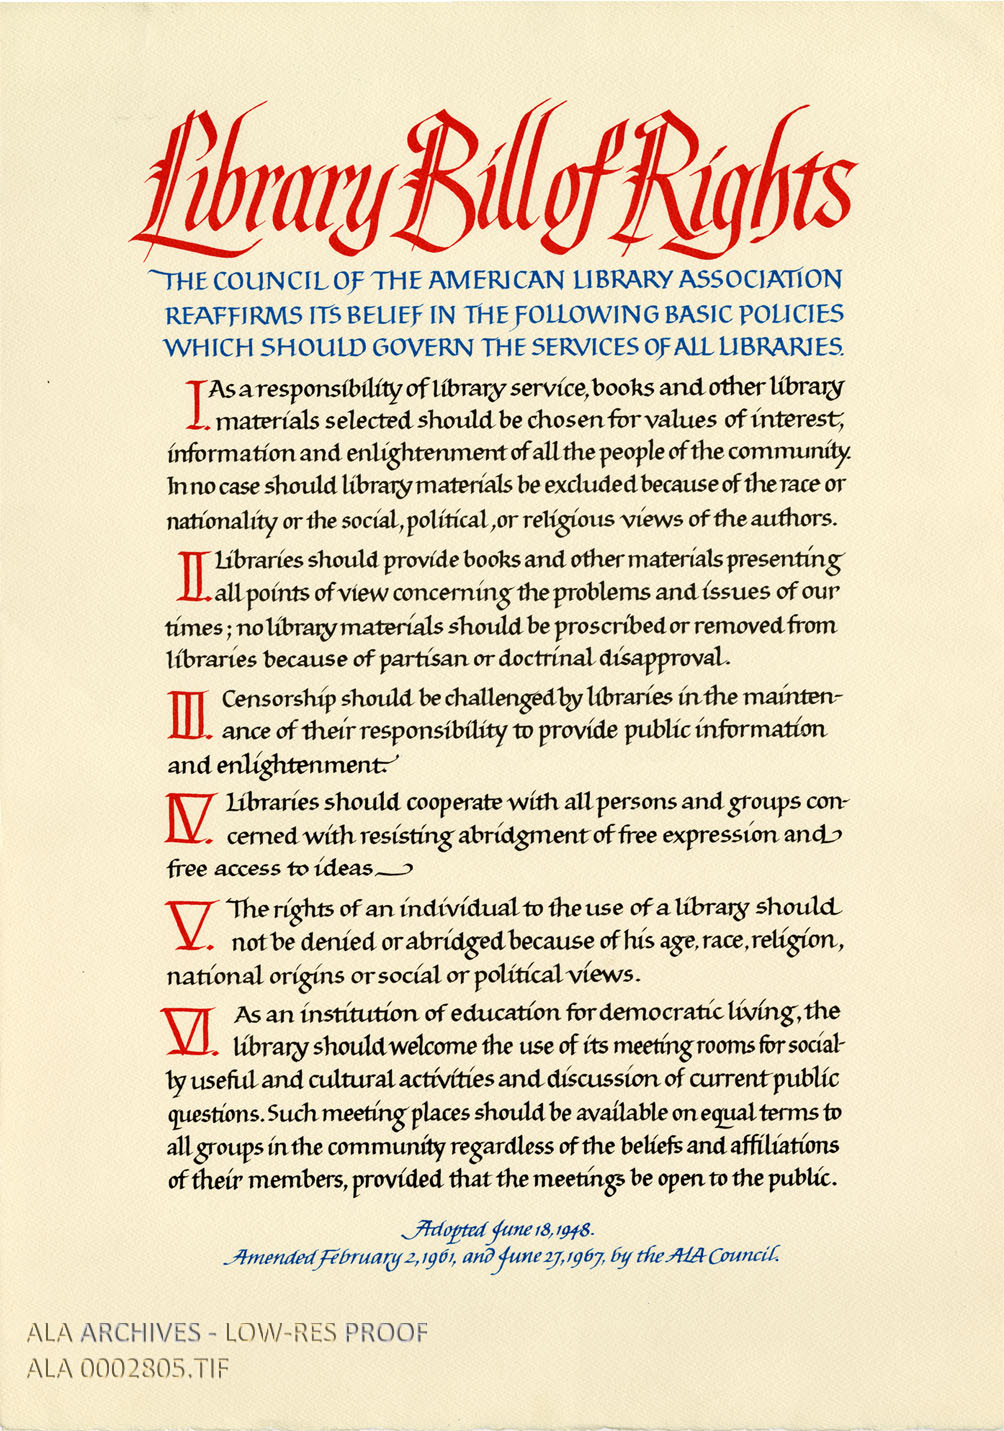 A poster of the Library Bill of Rights as amended by the ALA Council in 1967.